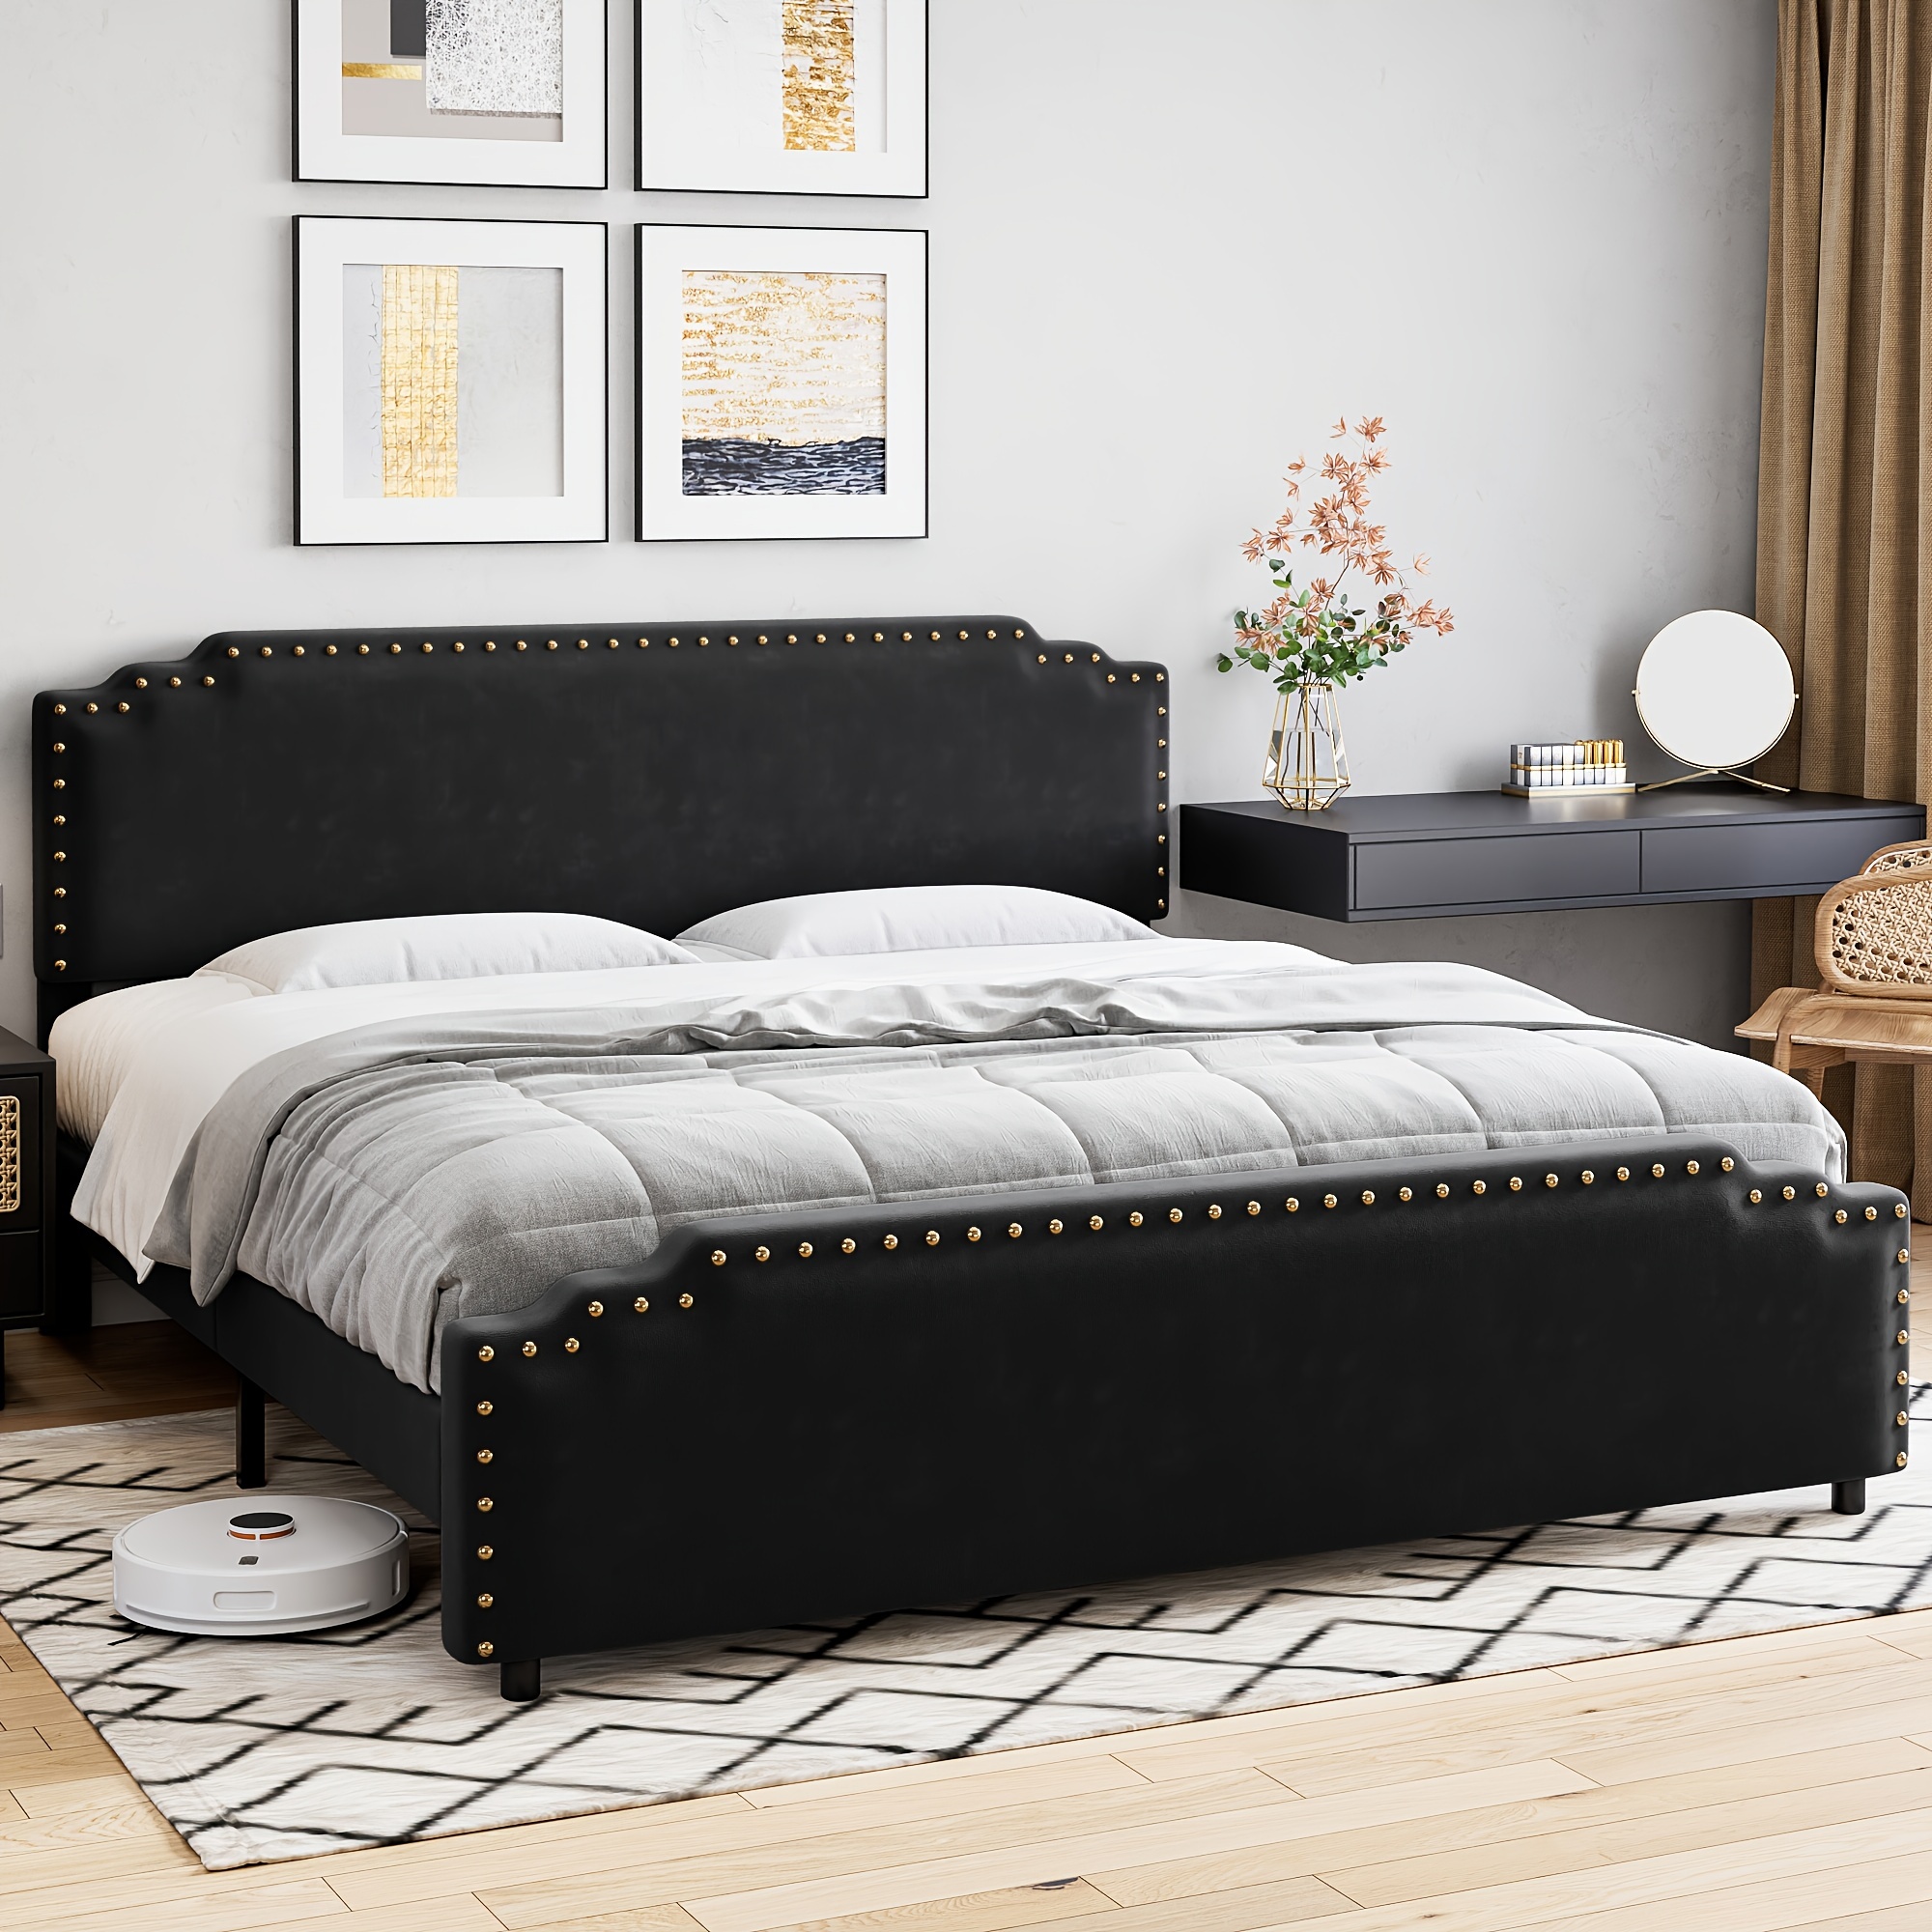 

1pc Full/queen/king Size Velvet Upholstered Platform Bed Frame With Rivet Trimmed Headboard & Solid Wooden Slats Support, No Box Spring Needed, Easy Assembly, Modern Style In Grey/black Options